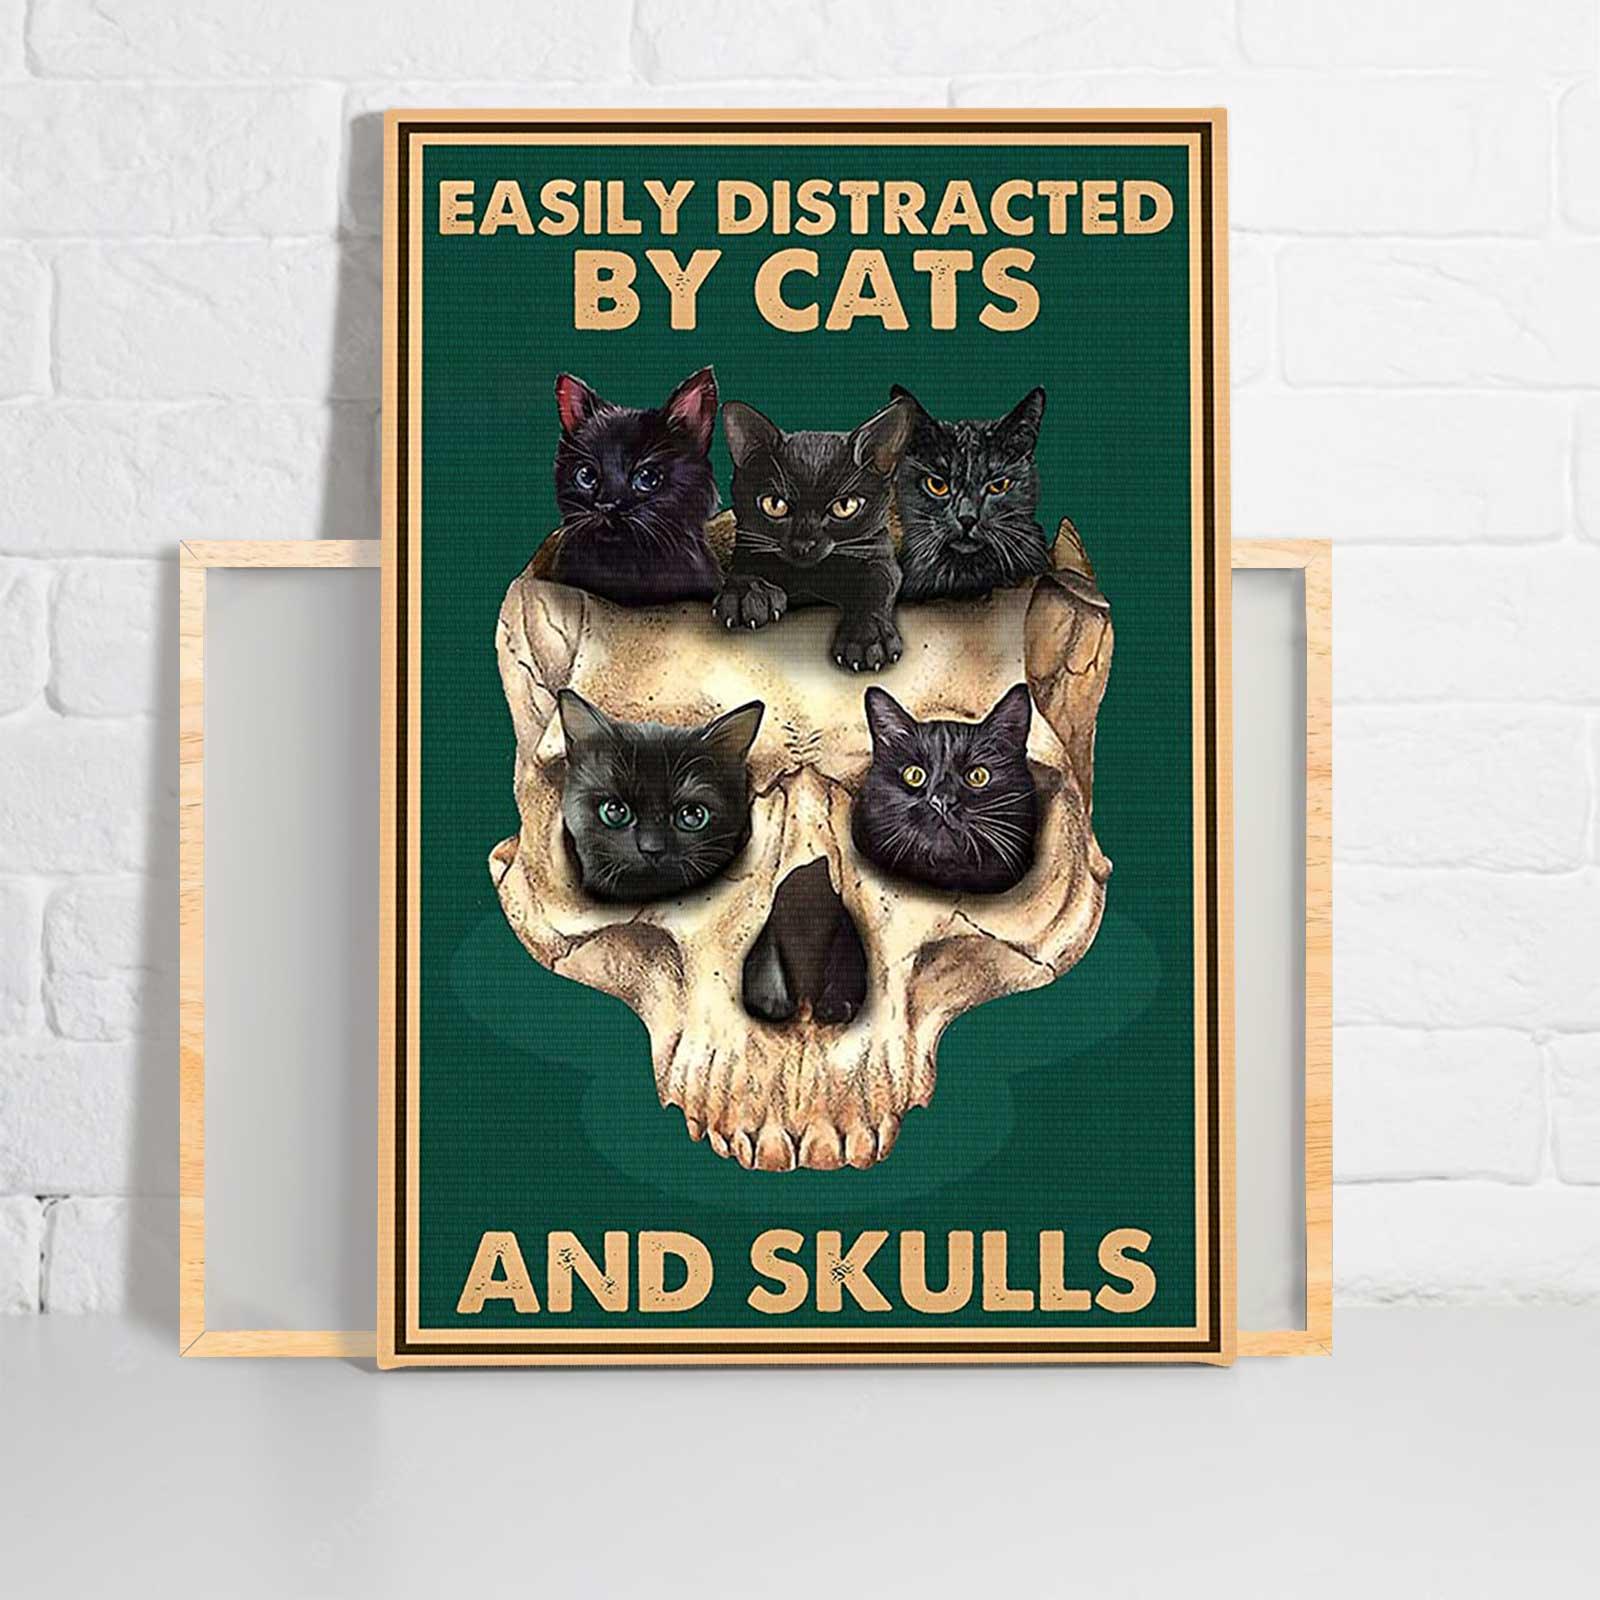 Cats And Skulls Portrait Canvas - Easily Distracted By Cats And Skulls, Black Cat Vintage Portrait Canvas - Gift For Family, Friends, Cat Lovers - Amzanimalsgift